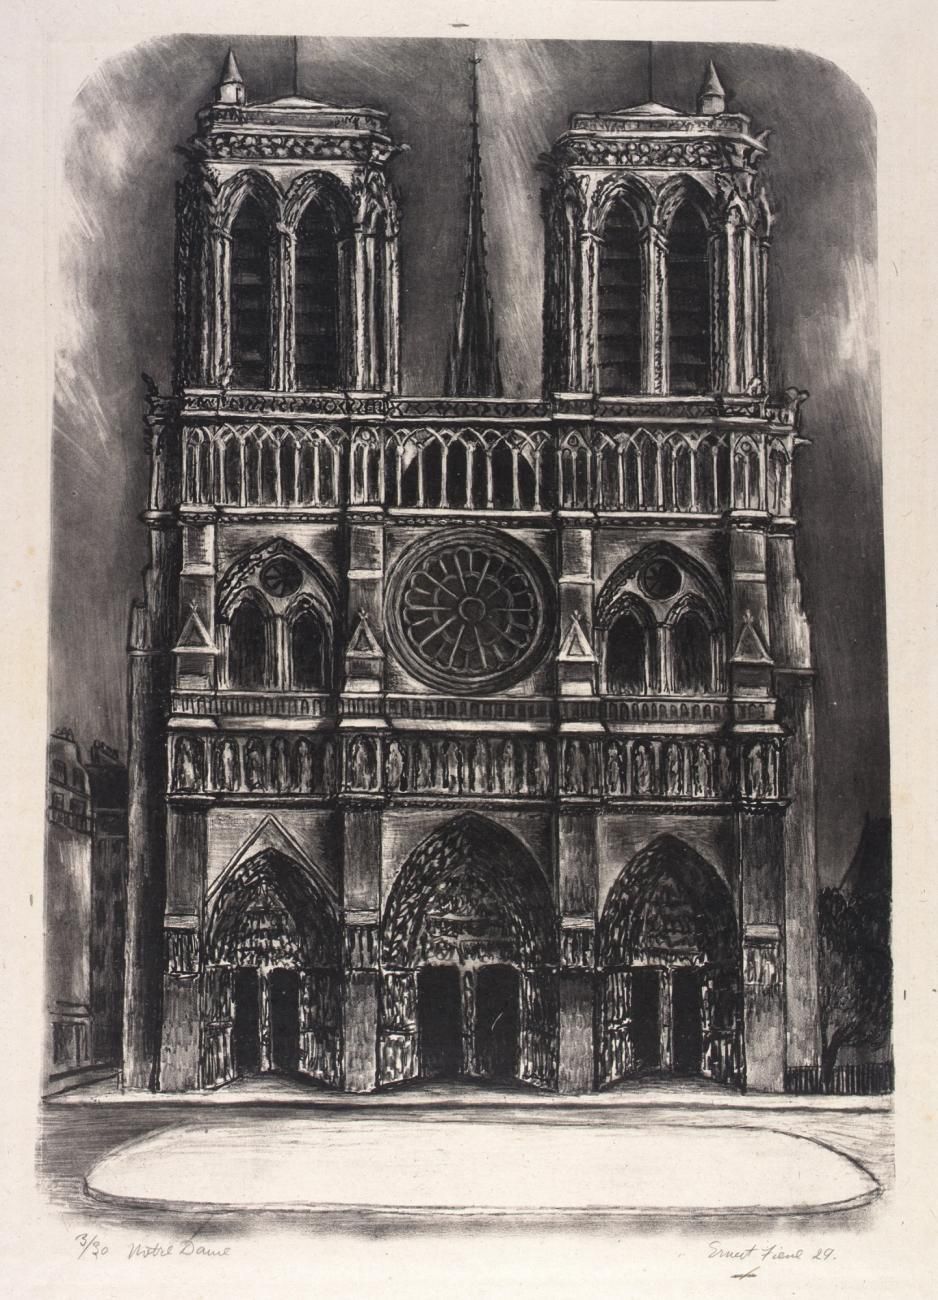 A lithograph of the front facade of Notre Dame.